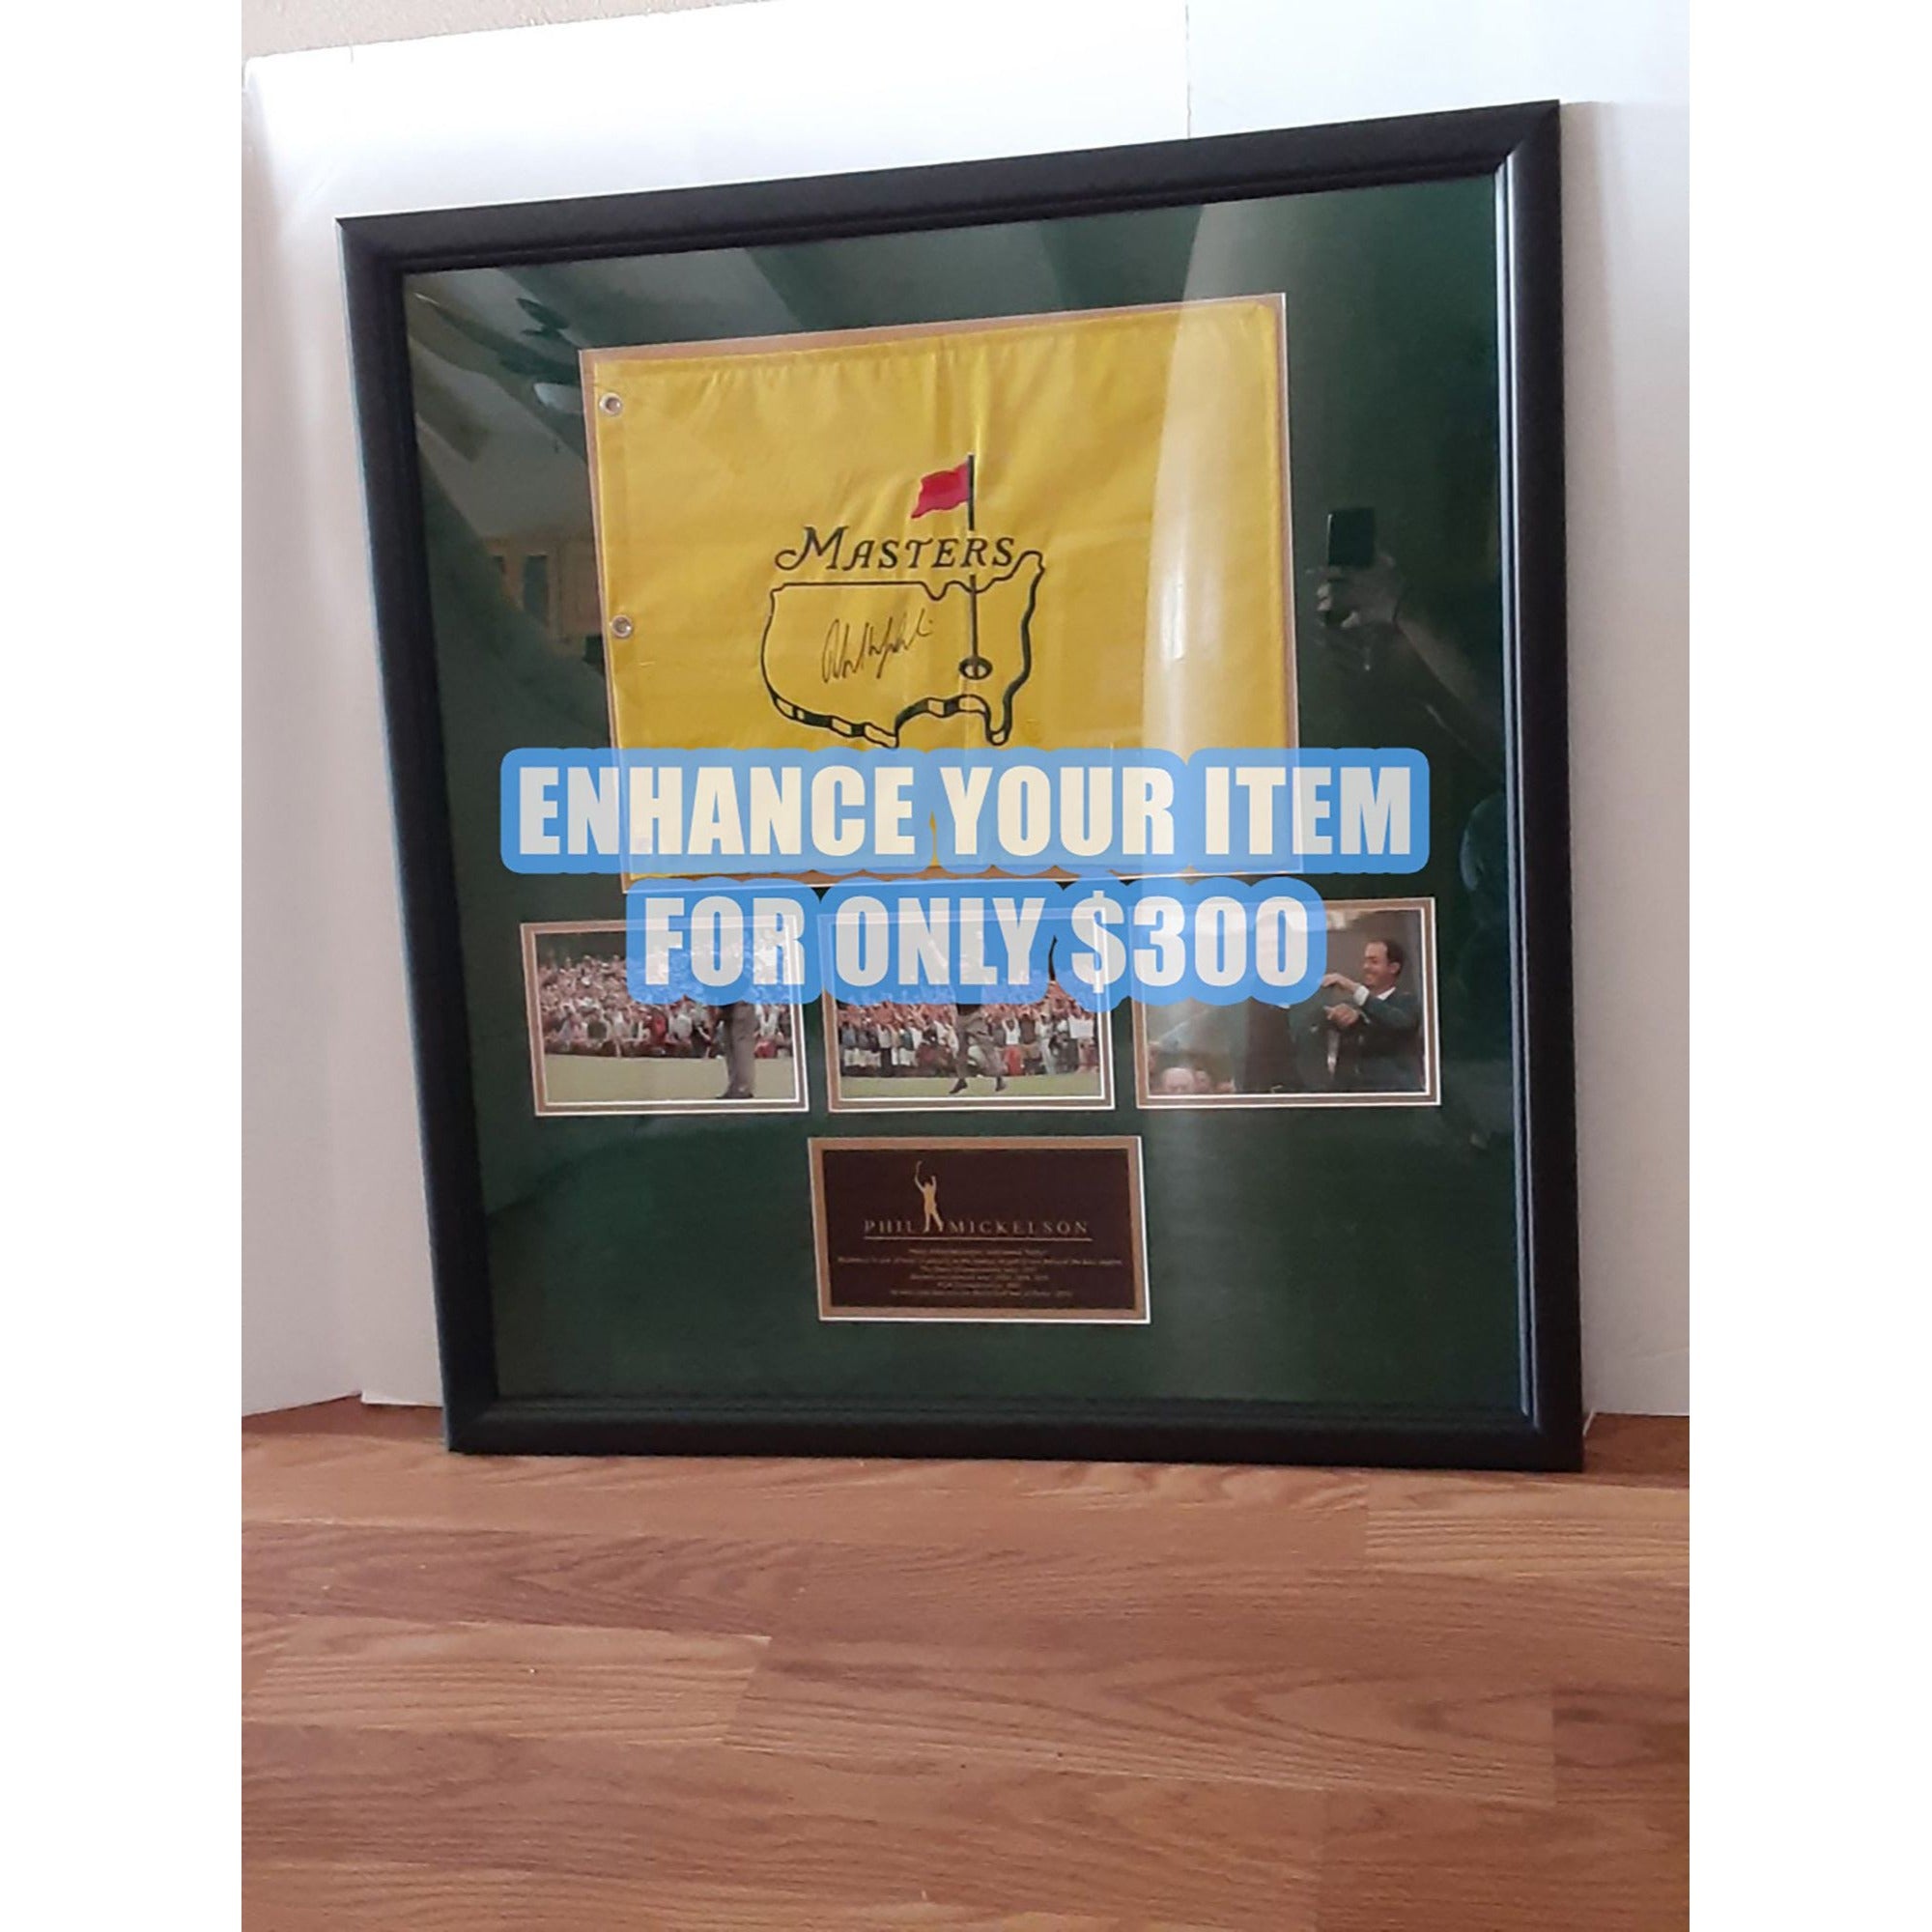 Tiger Woods St. Andrews 2000 open flag signed with proof